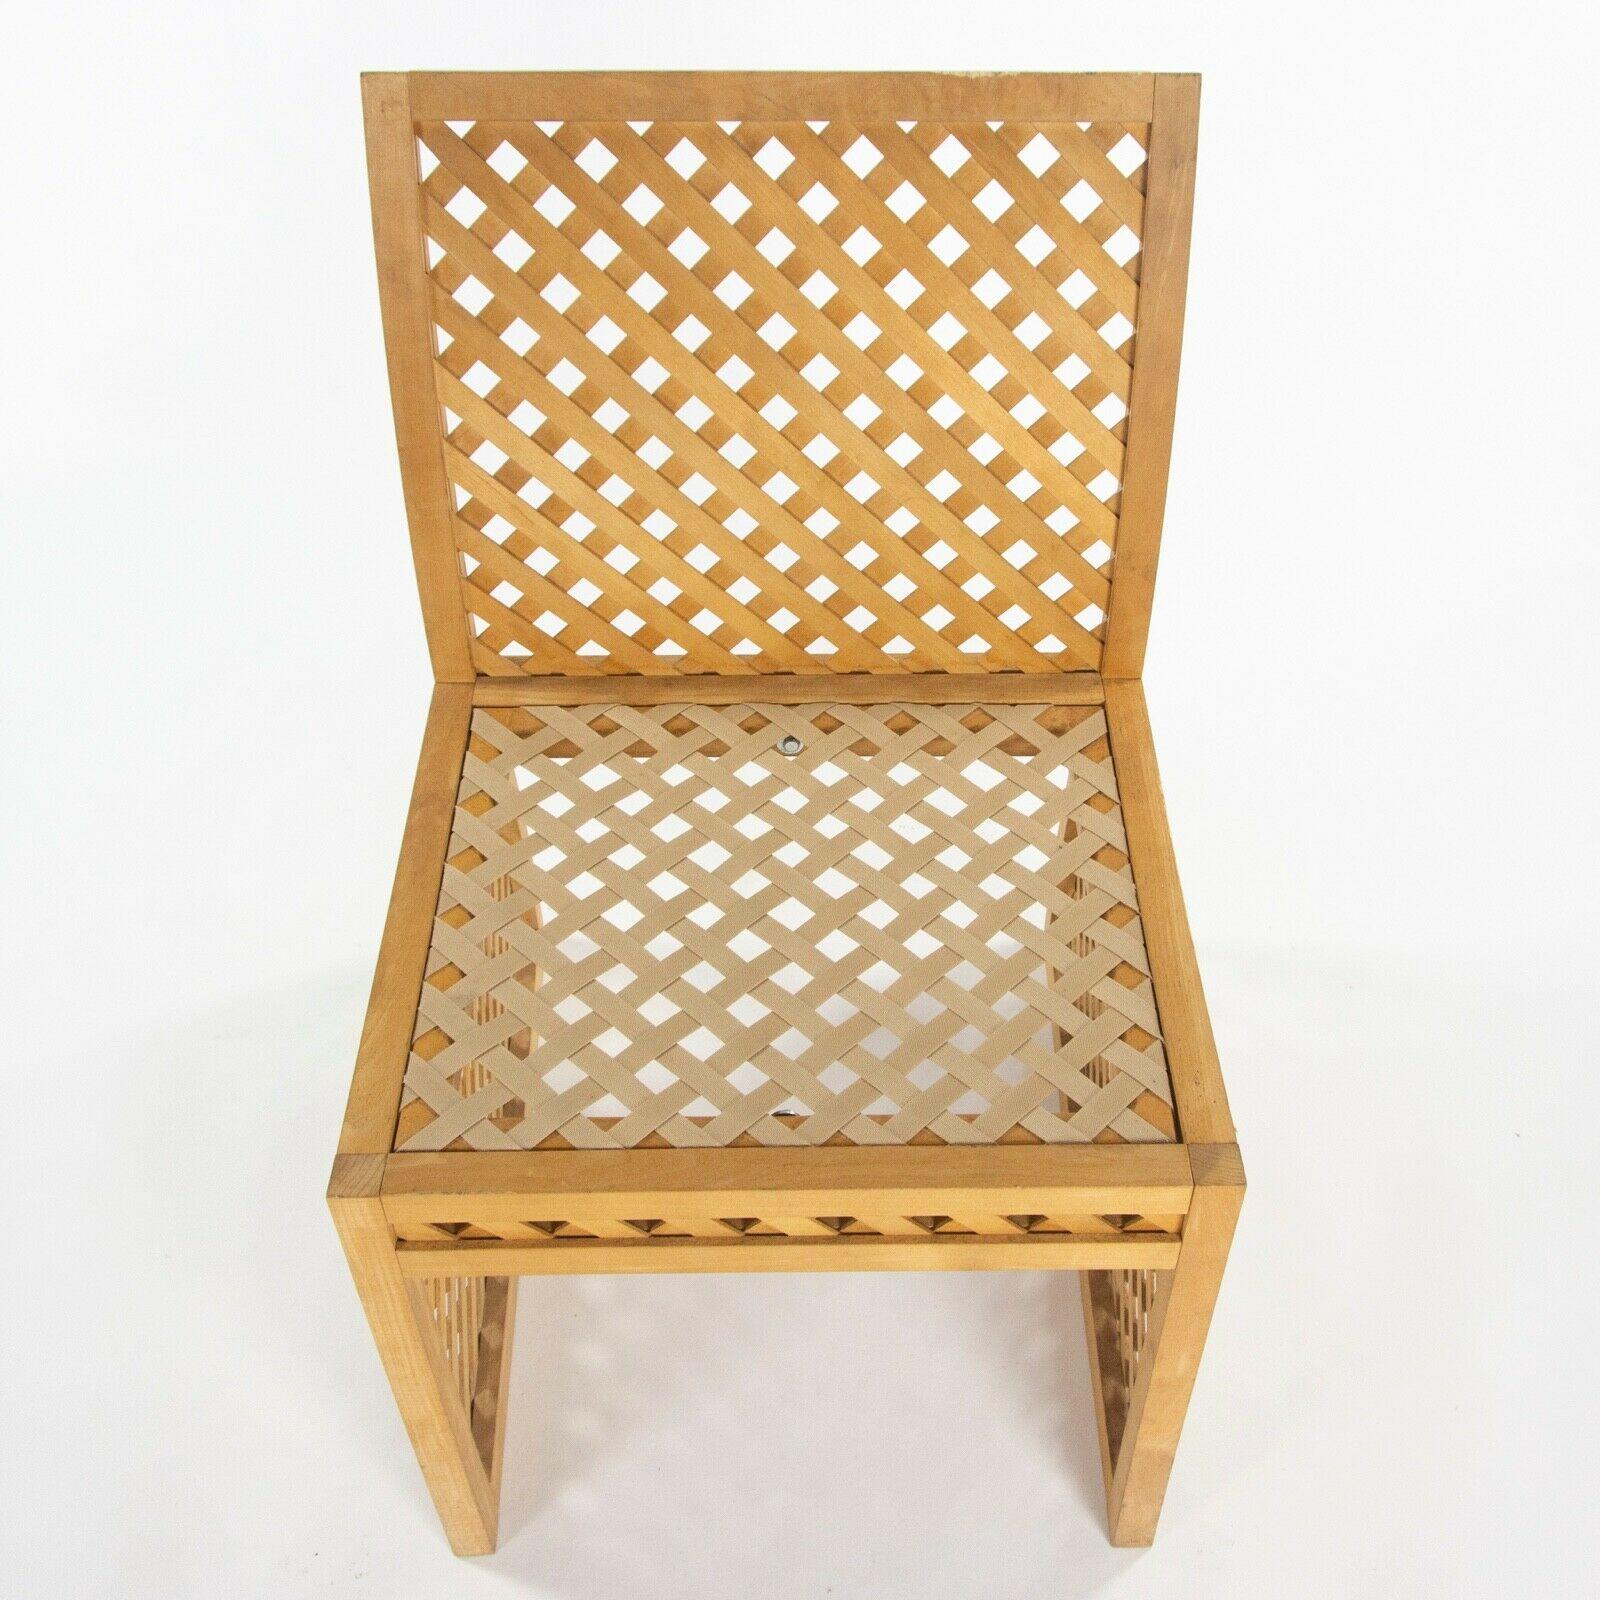 1985 Prototype Richard Schultz Wooden Outdoor Collection Dining Chair For Sale 4